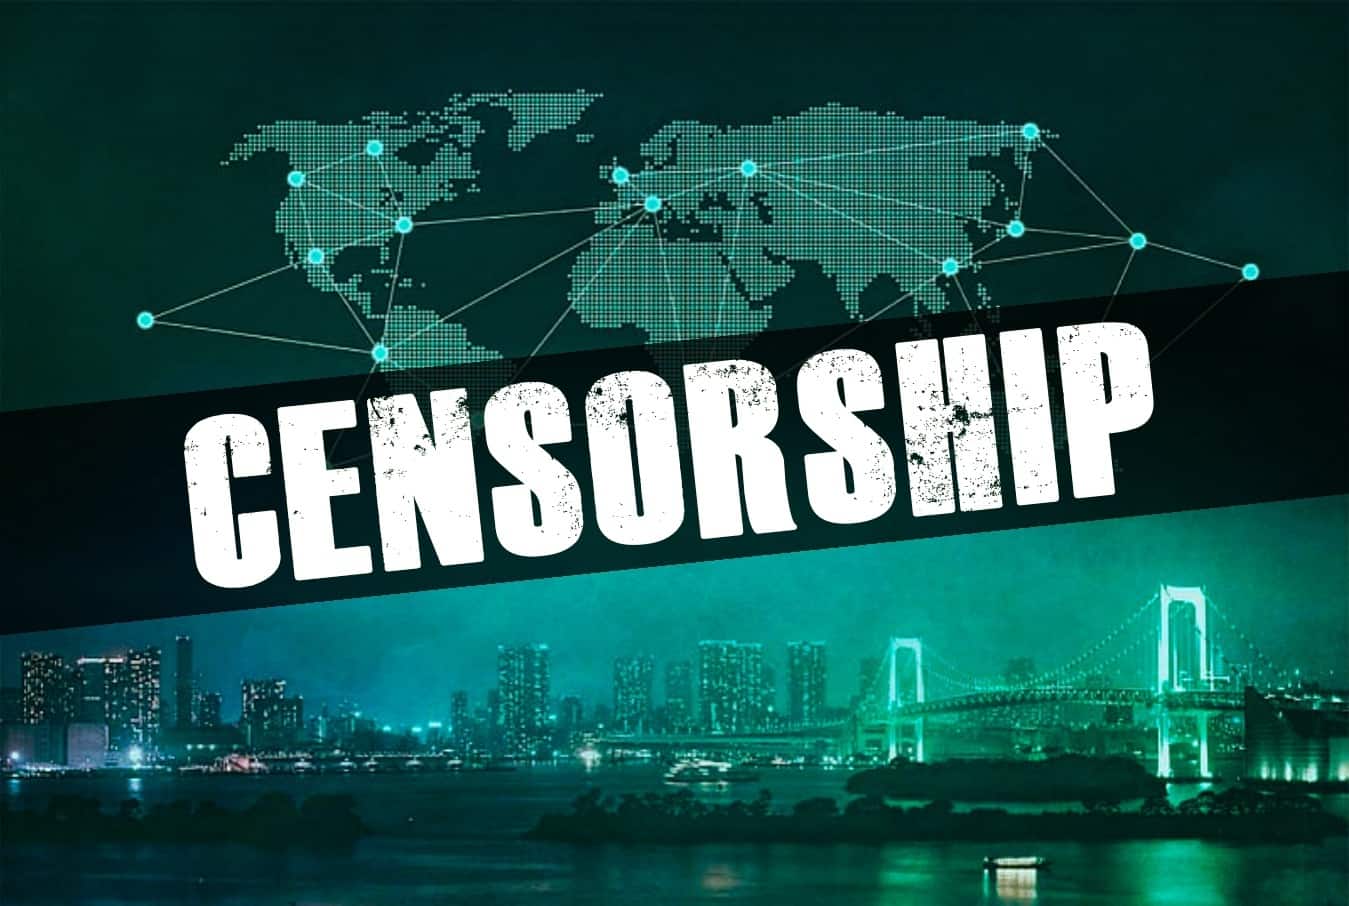 Top 10 worst countries for Internet freedom & censorship